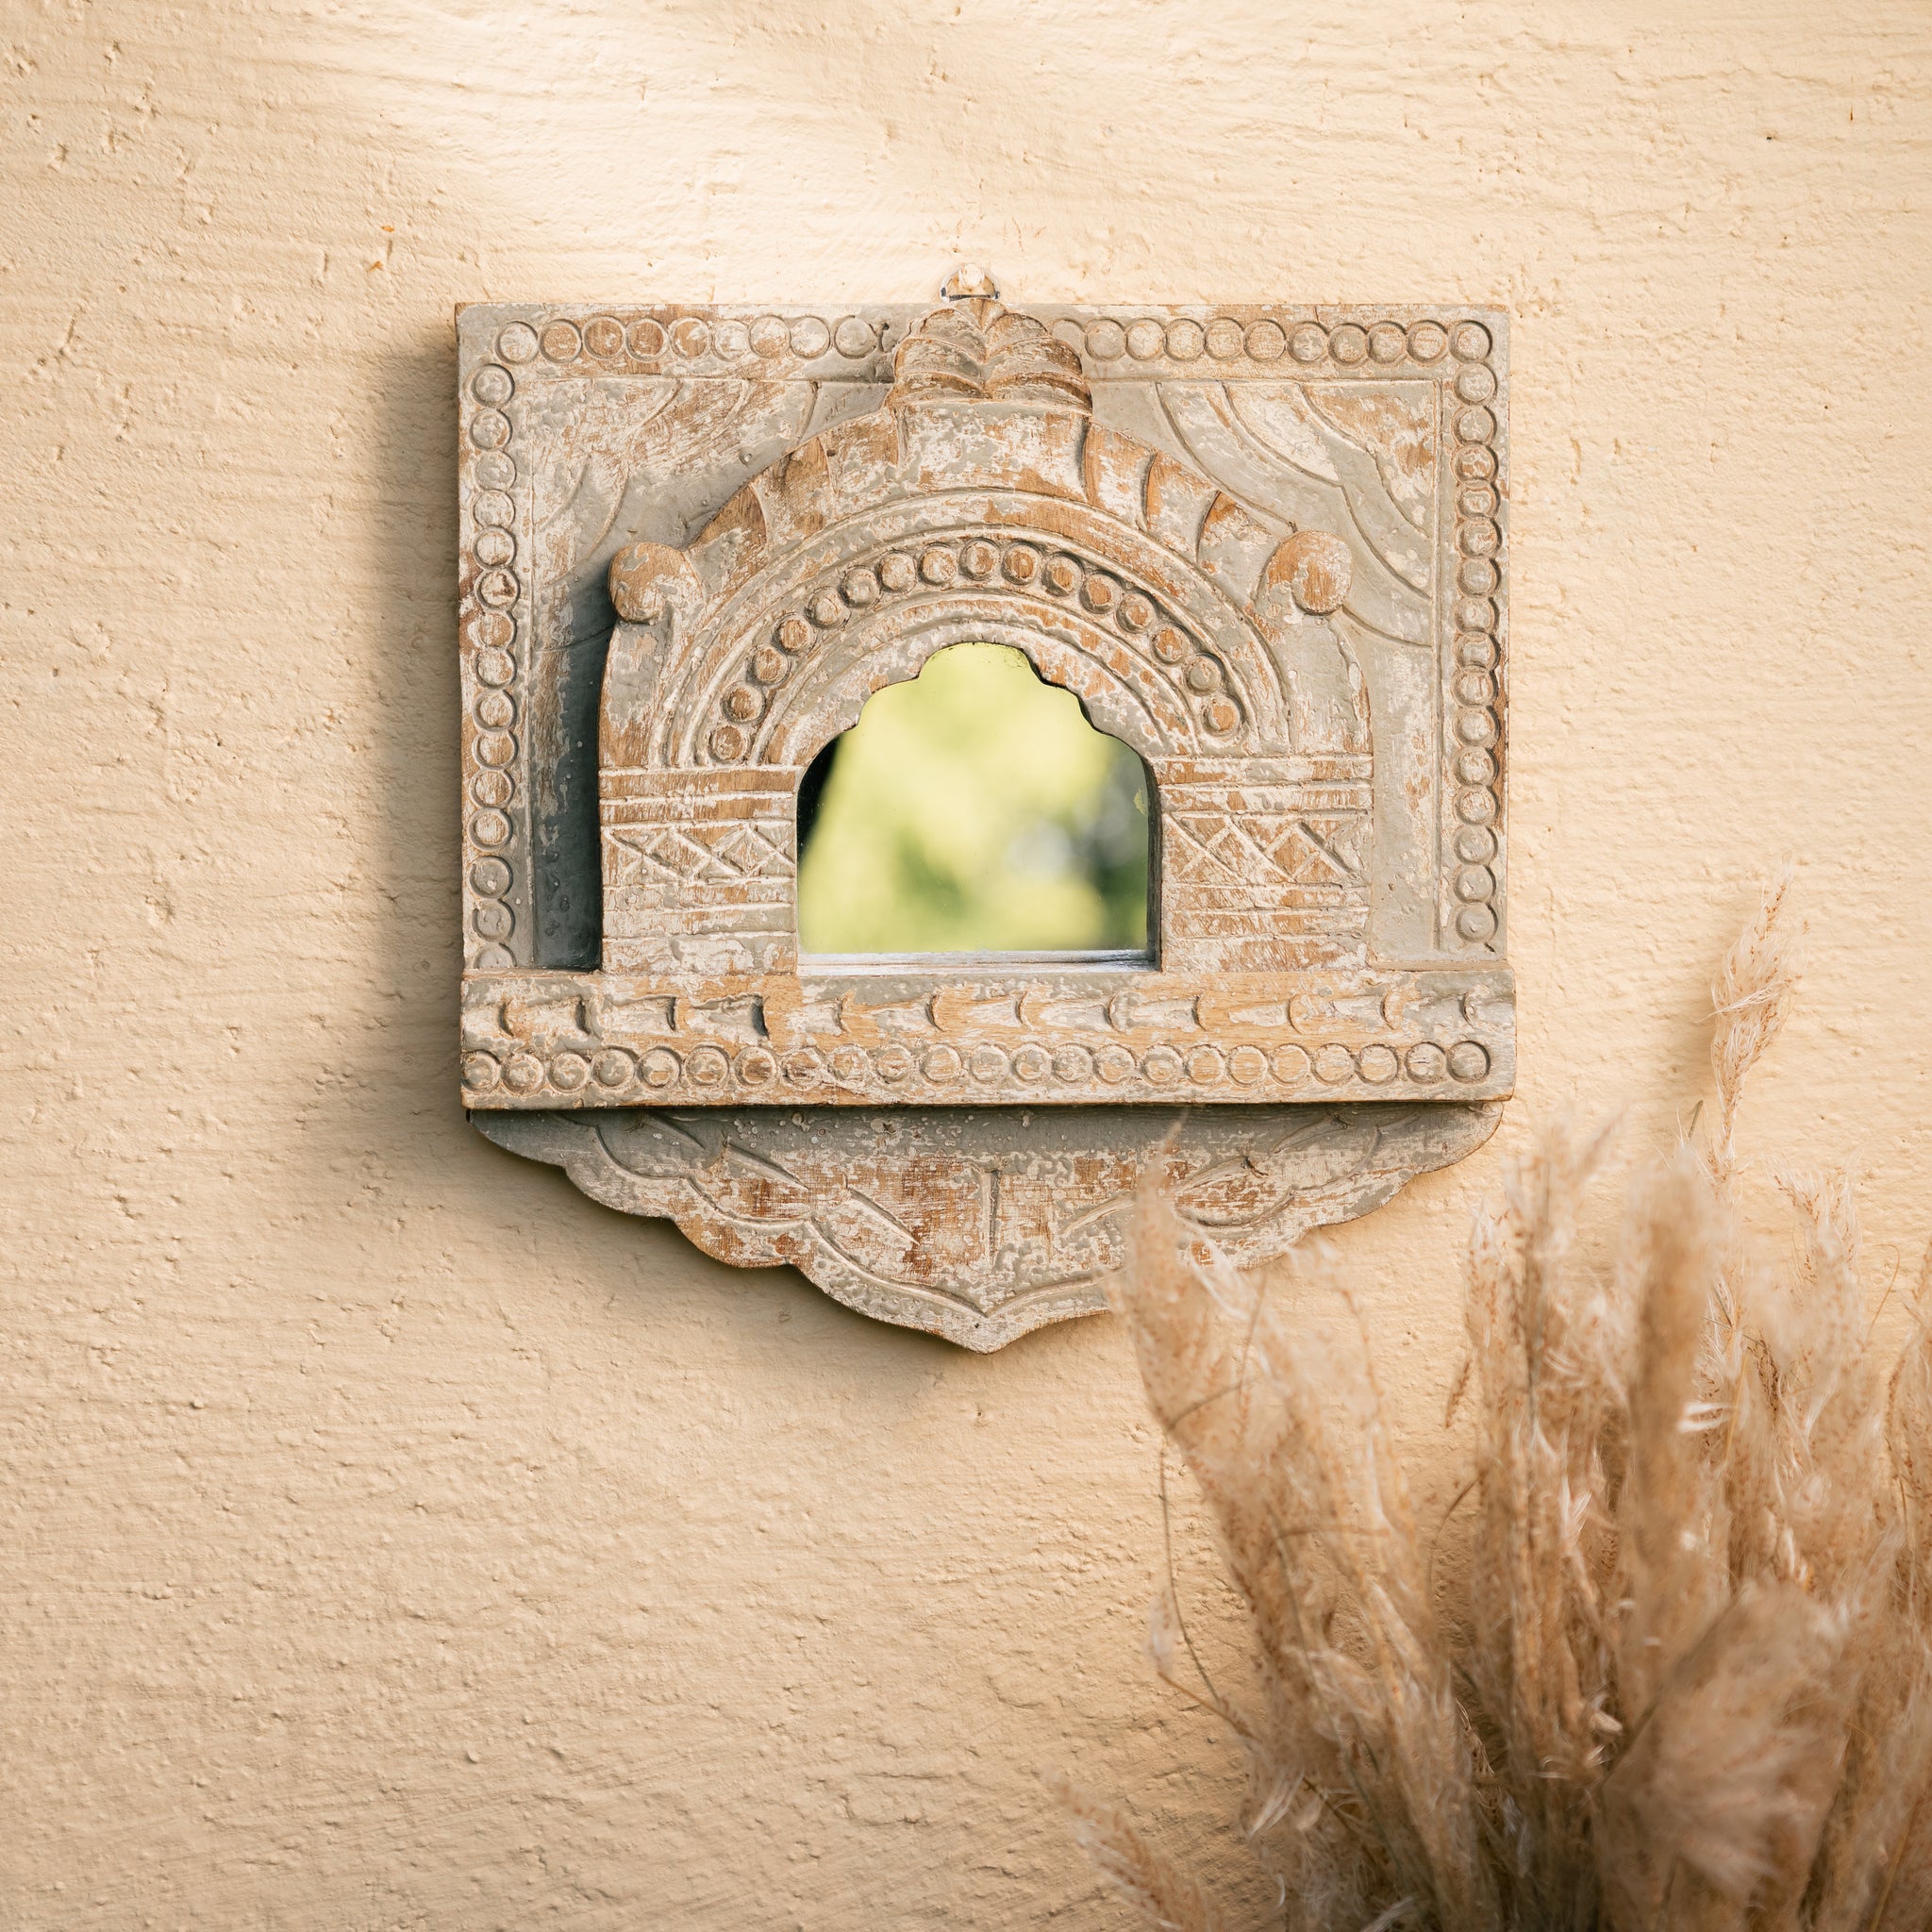  Antique Style Wall Mirror, Detailed Carved Mirror Frame, Handcrafted Wooden Wall Mirror, Preserved Wooden Mirror Frame, Rustic Charm Wall Décor, Rustic Wood Finish Mirror, Rustic Wooden Wall Mirror, Versatile Wooden Mirror Design, Vintage Carved Mirror Panel, Vintage Wooden Carved Wall Mirror, tesu